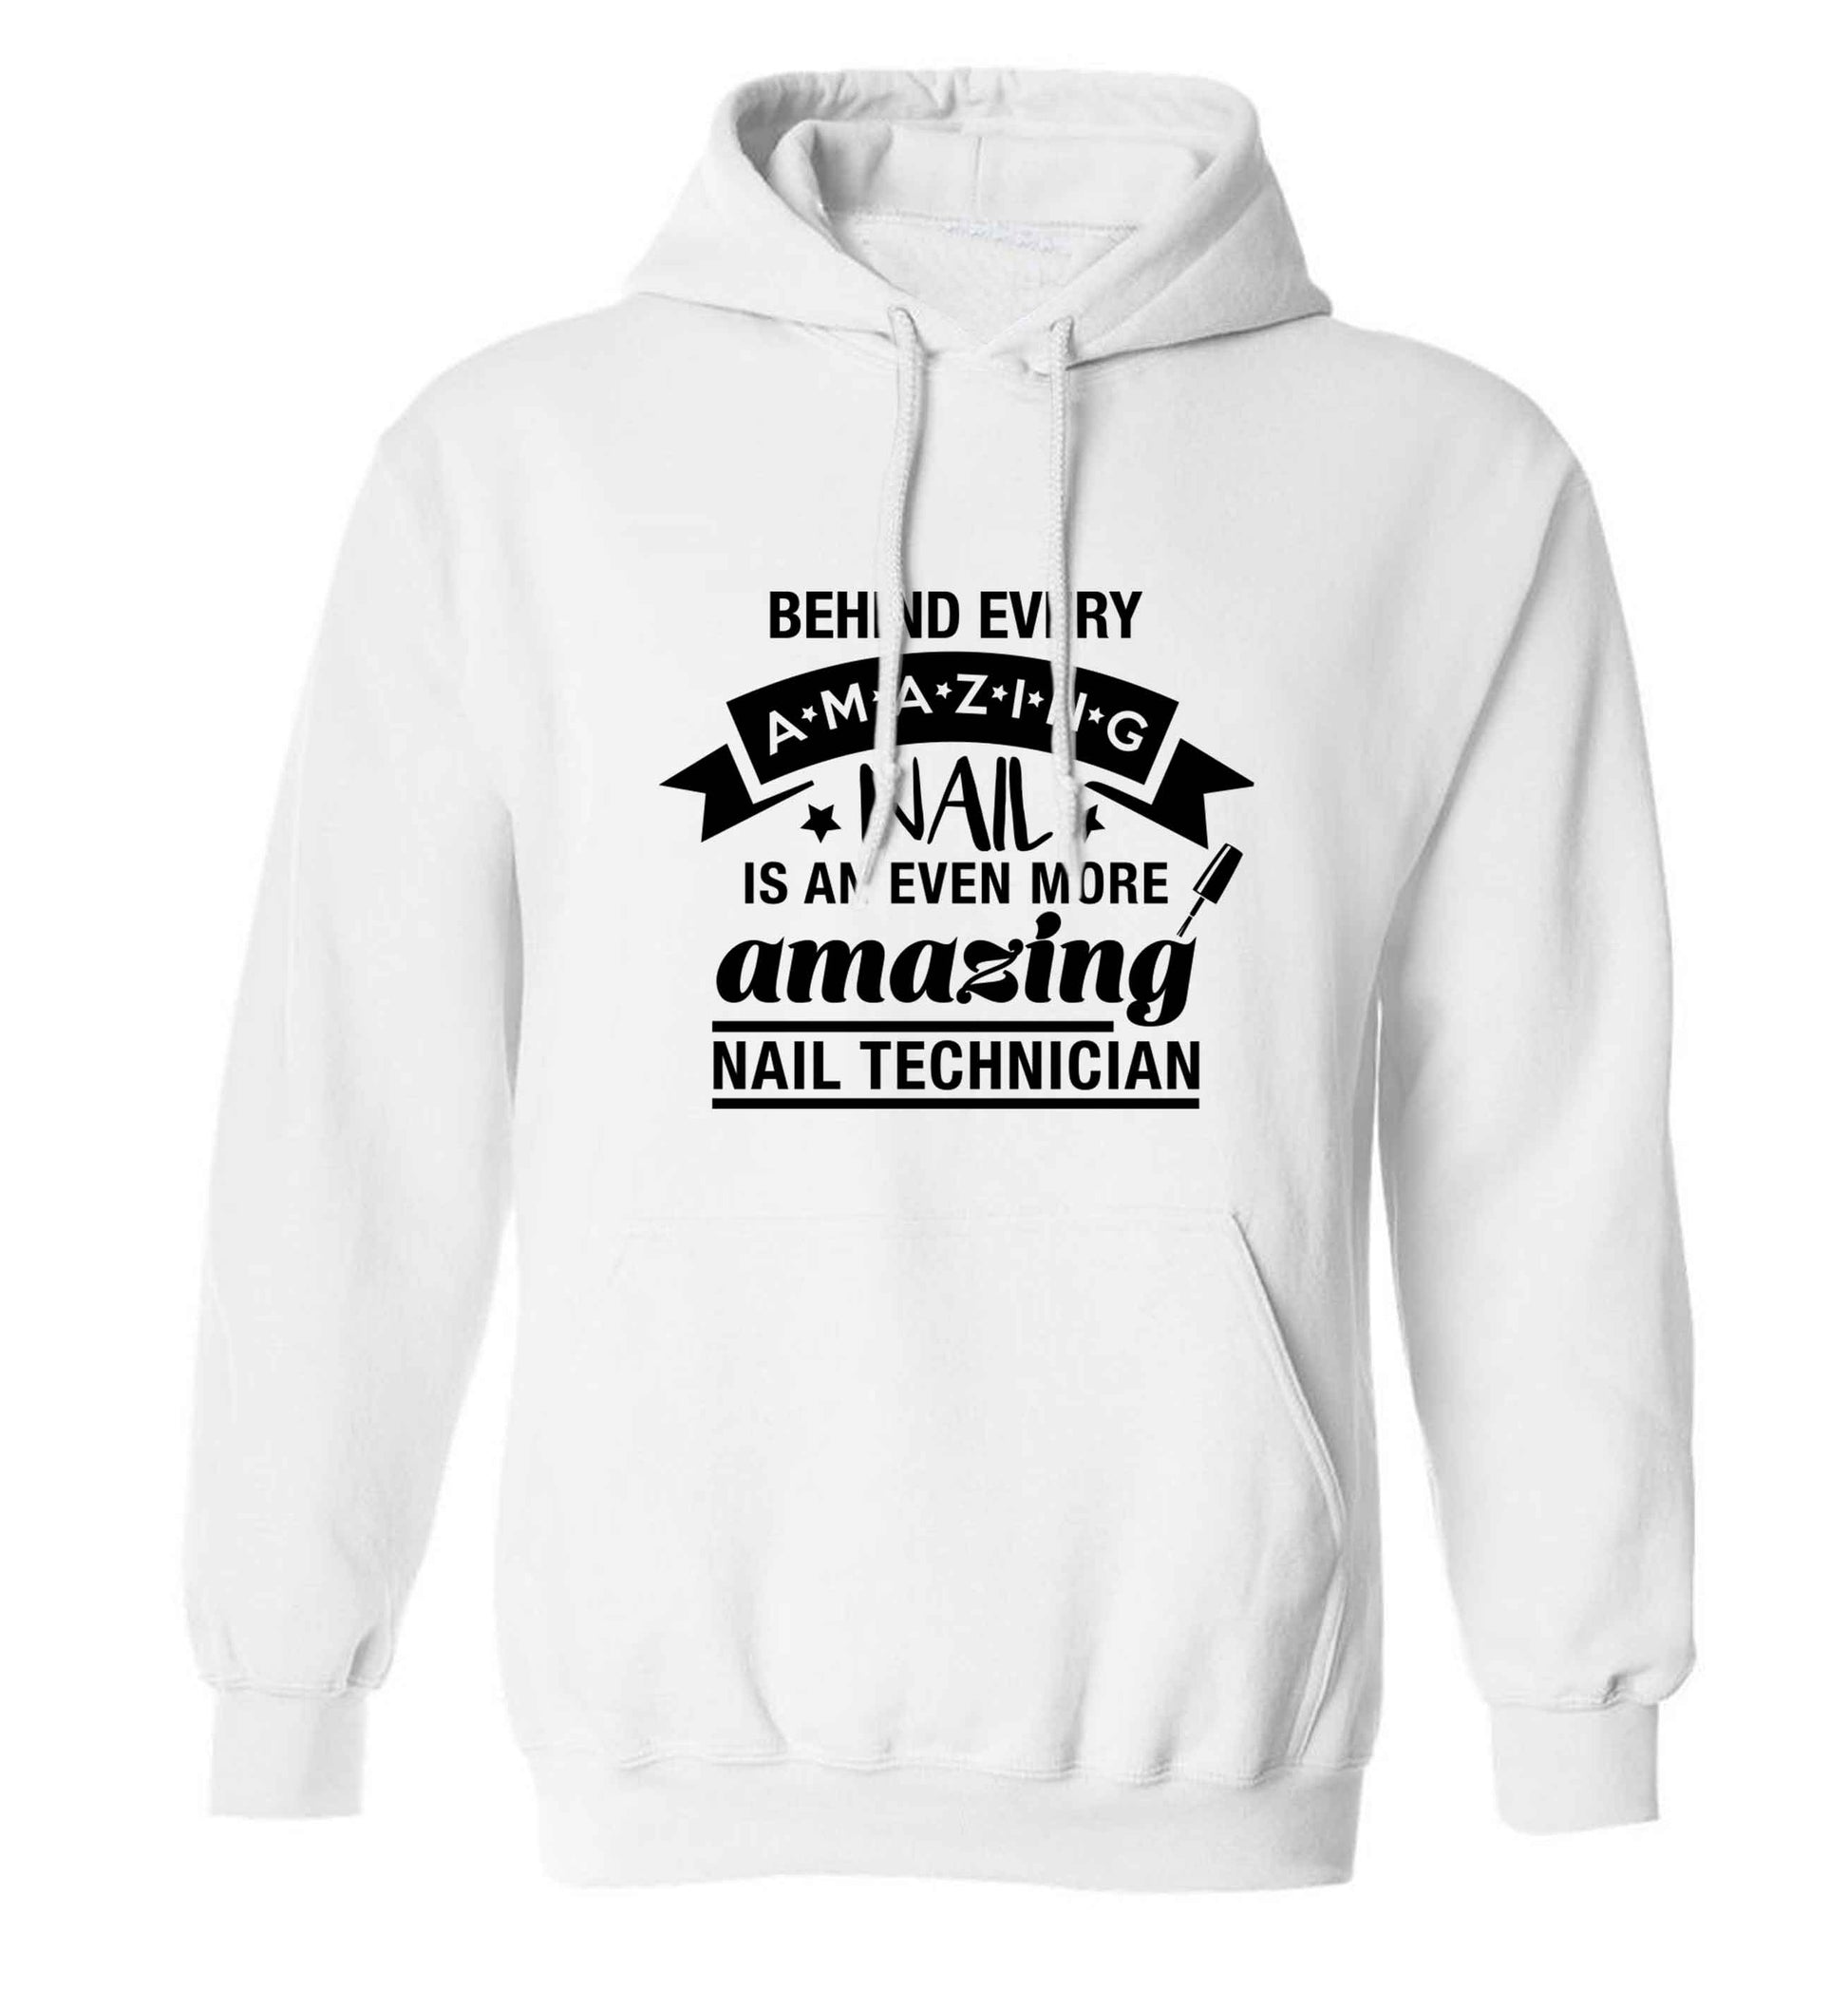 Behind every amazing nail is an even more amazing nail technician adults unisex white hoodie 2XL